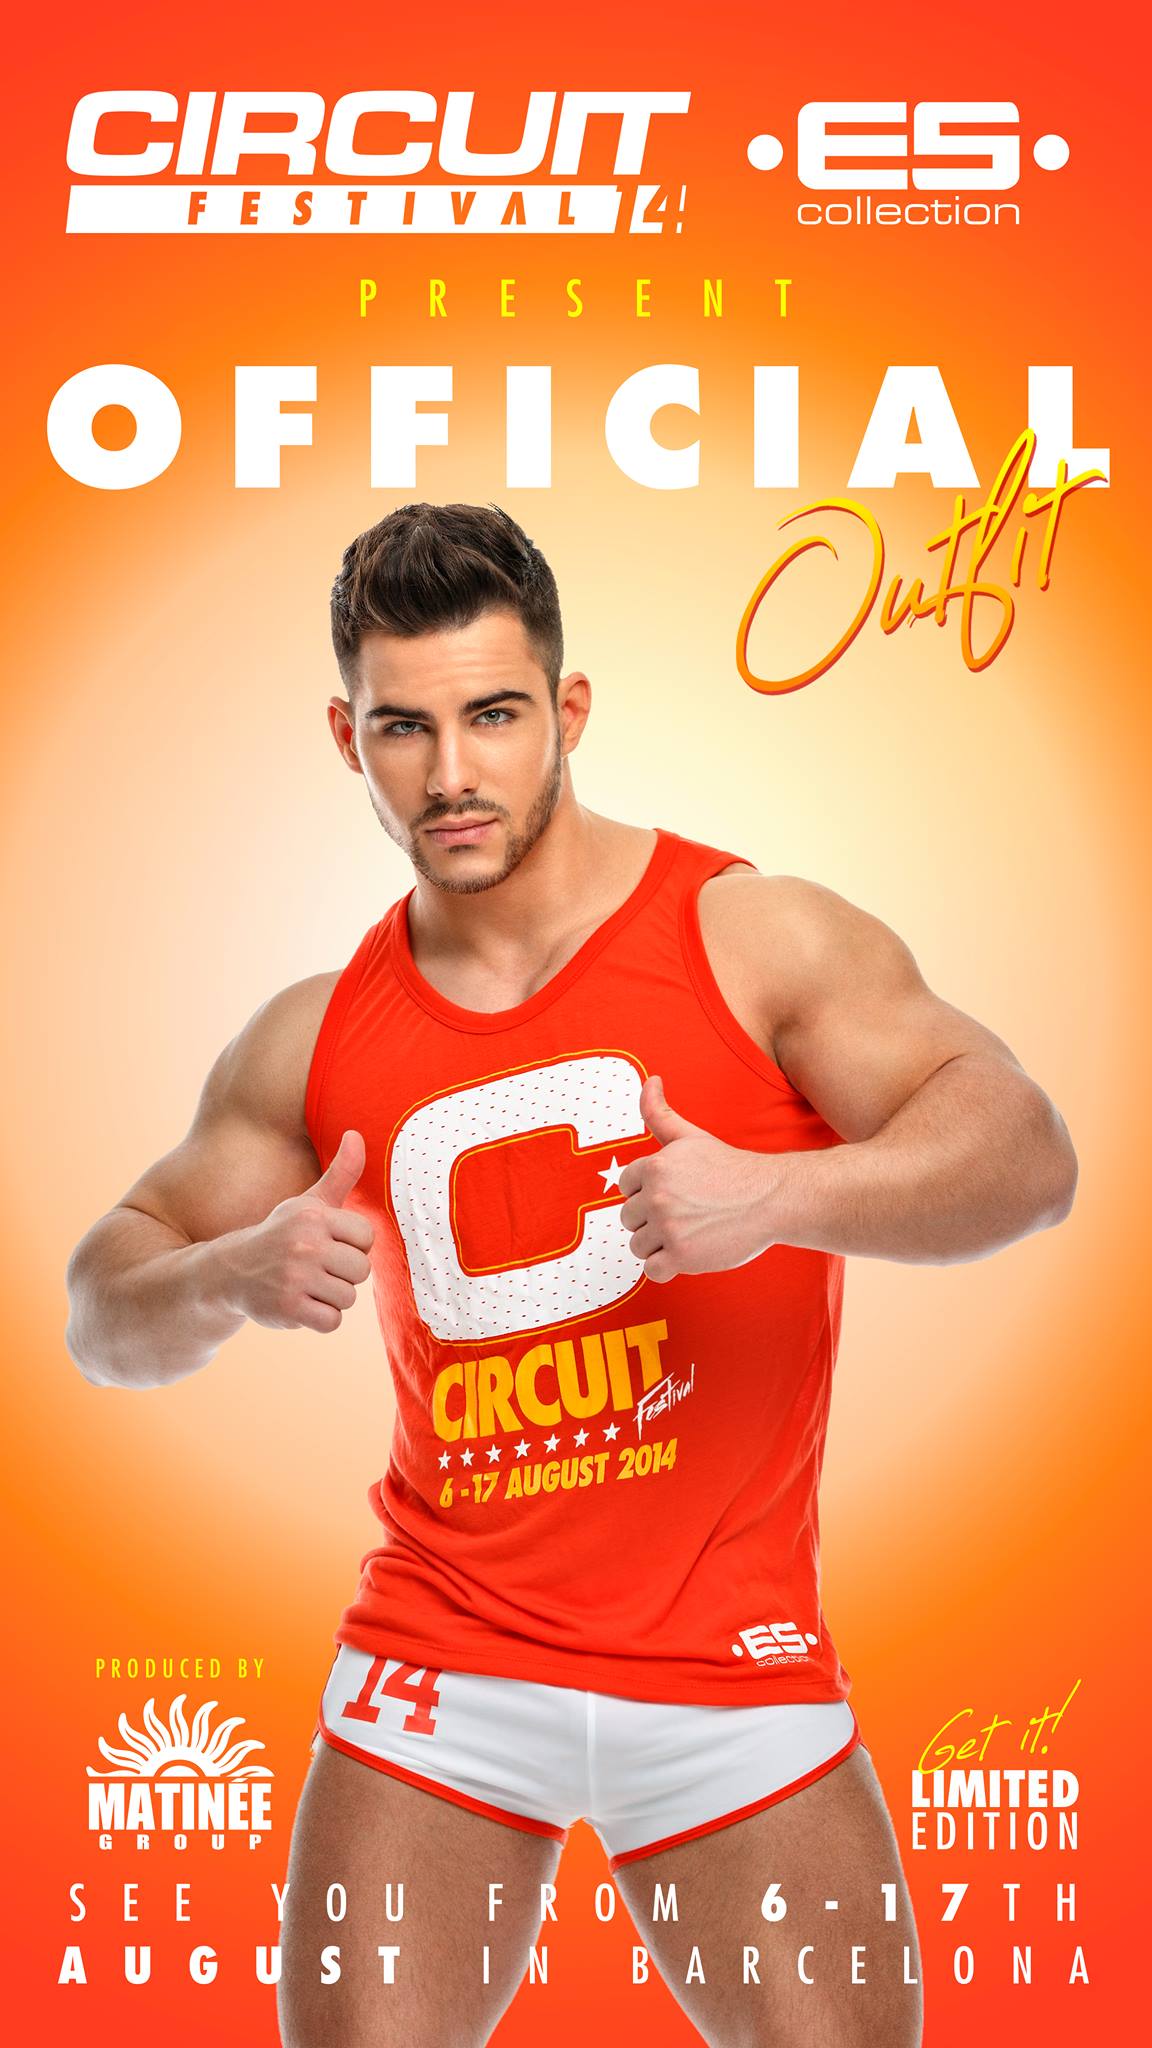 Roman Dawidoff for the 2014 Circuit Festival in Barcelona sponsored by Manhunt.